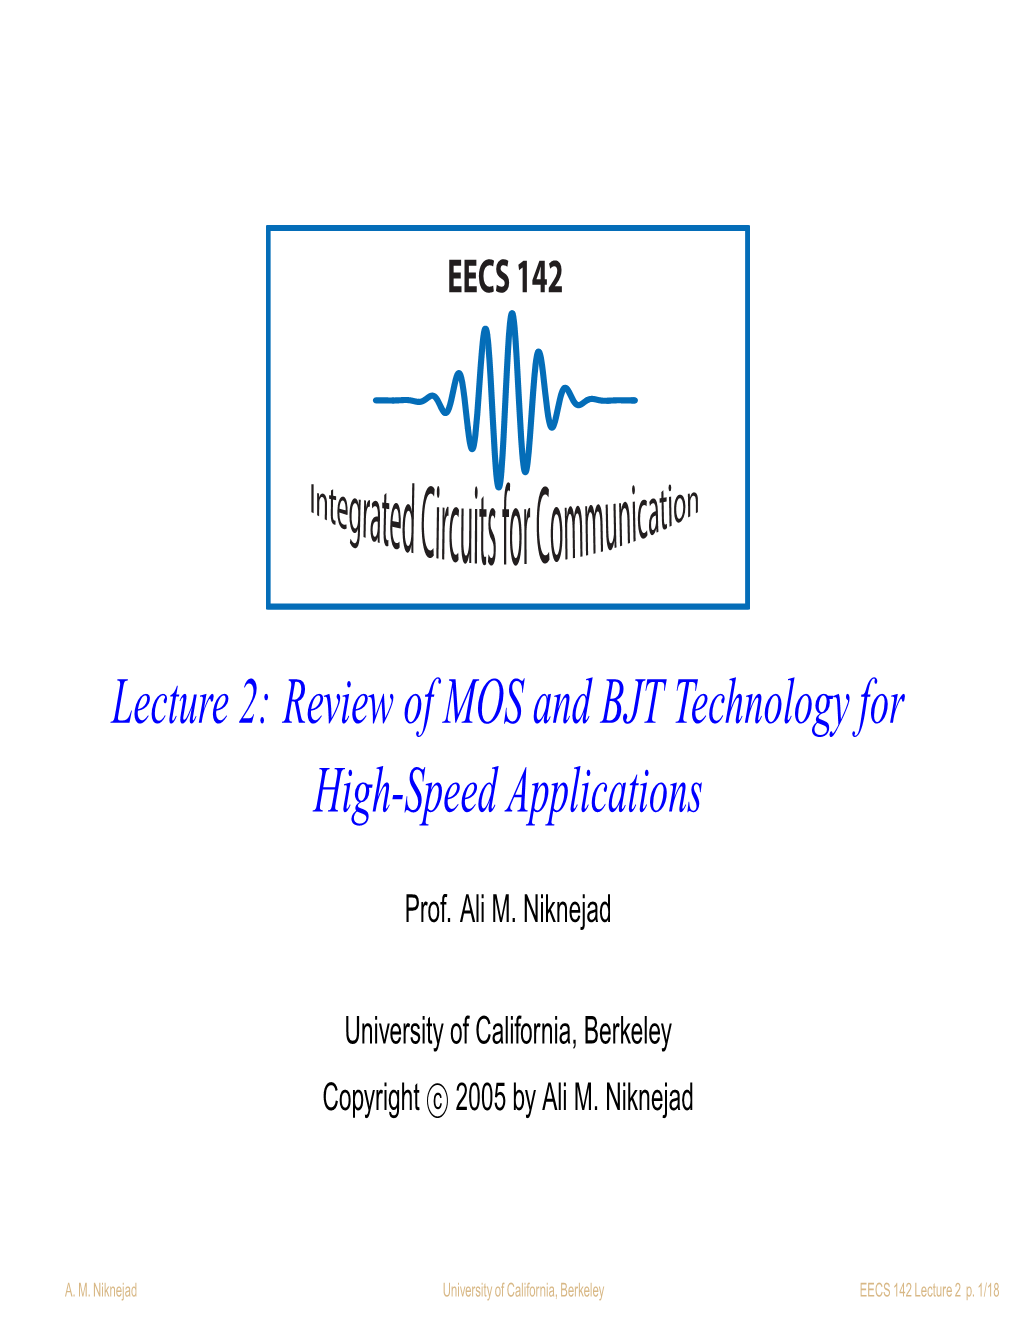 Review of MOS and BJT Technology for High-Speed Applications